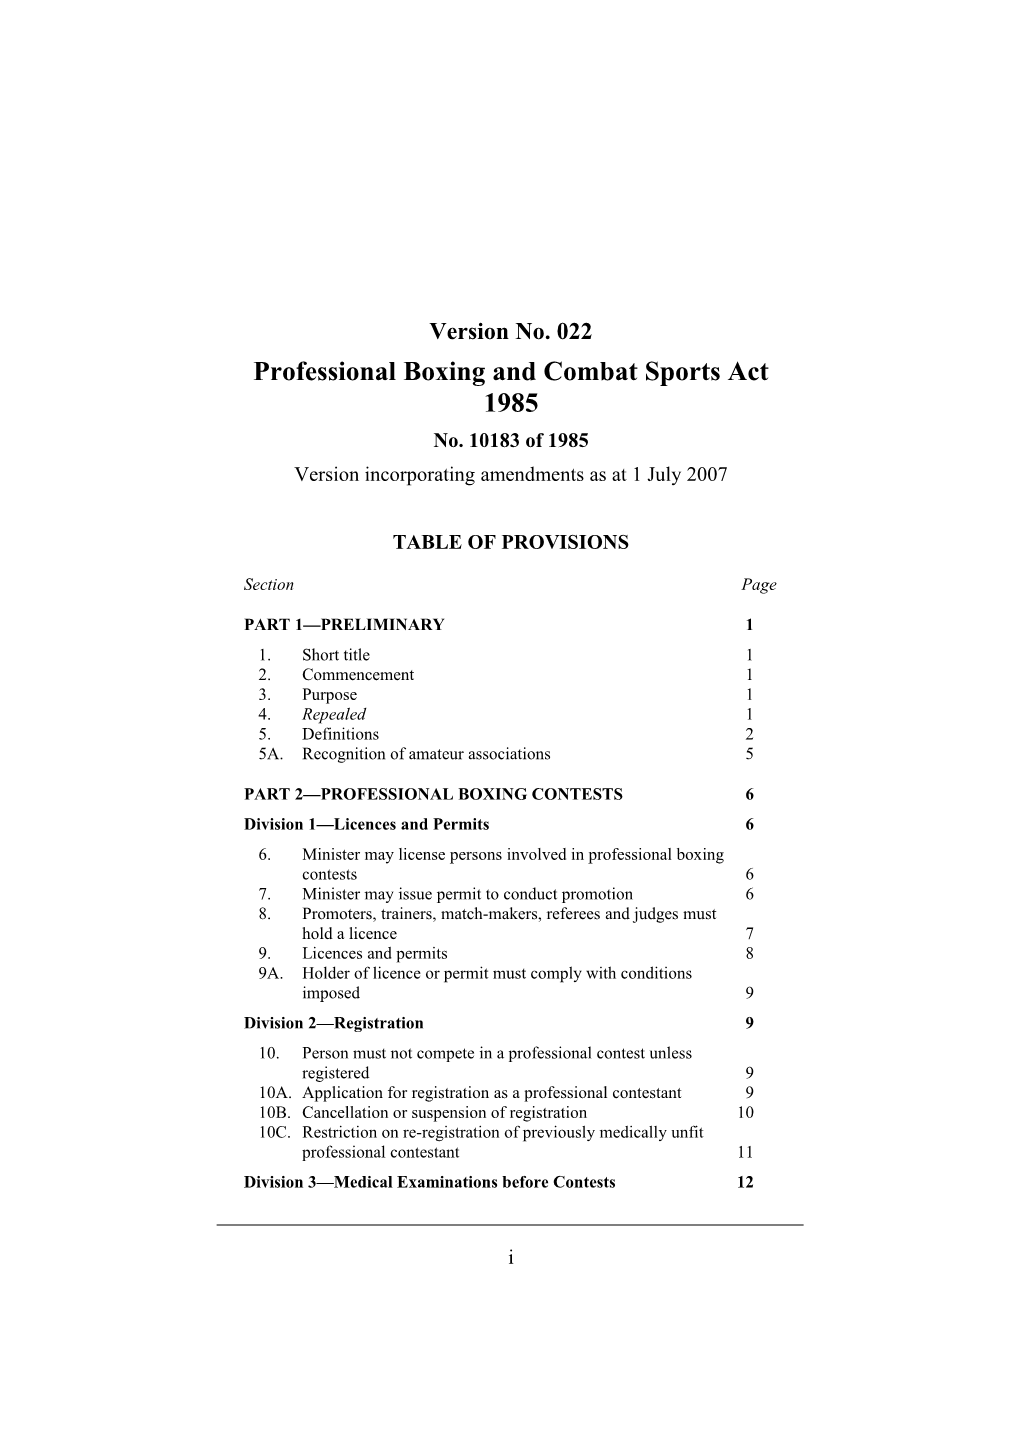 Professional Boxing and Combat Sports Act 1985